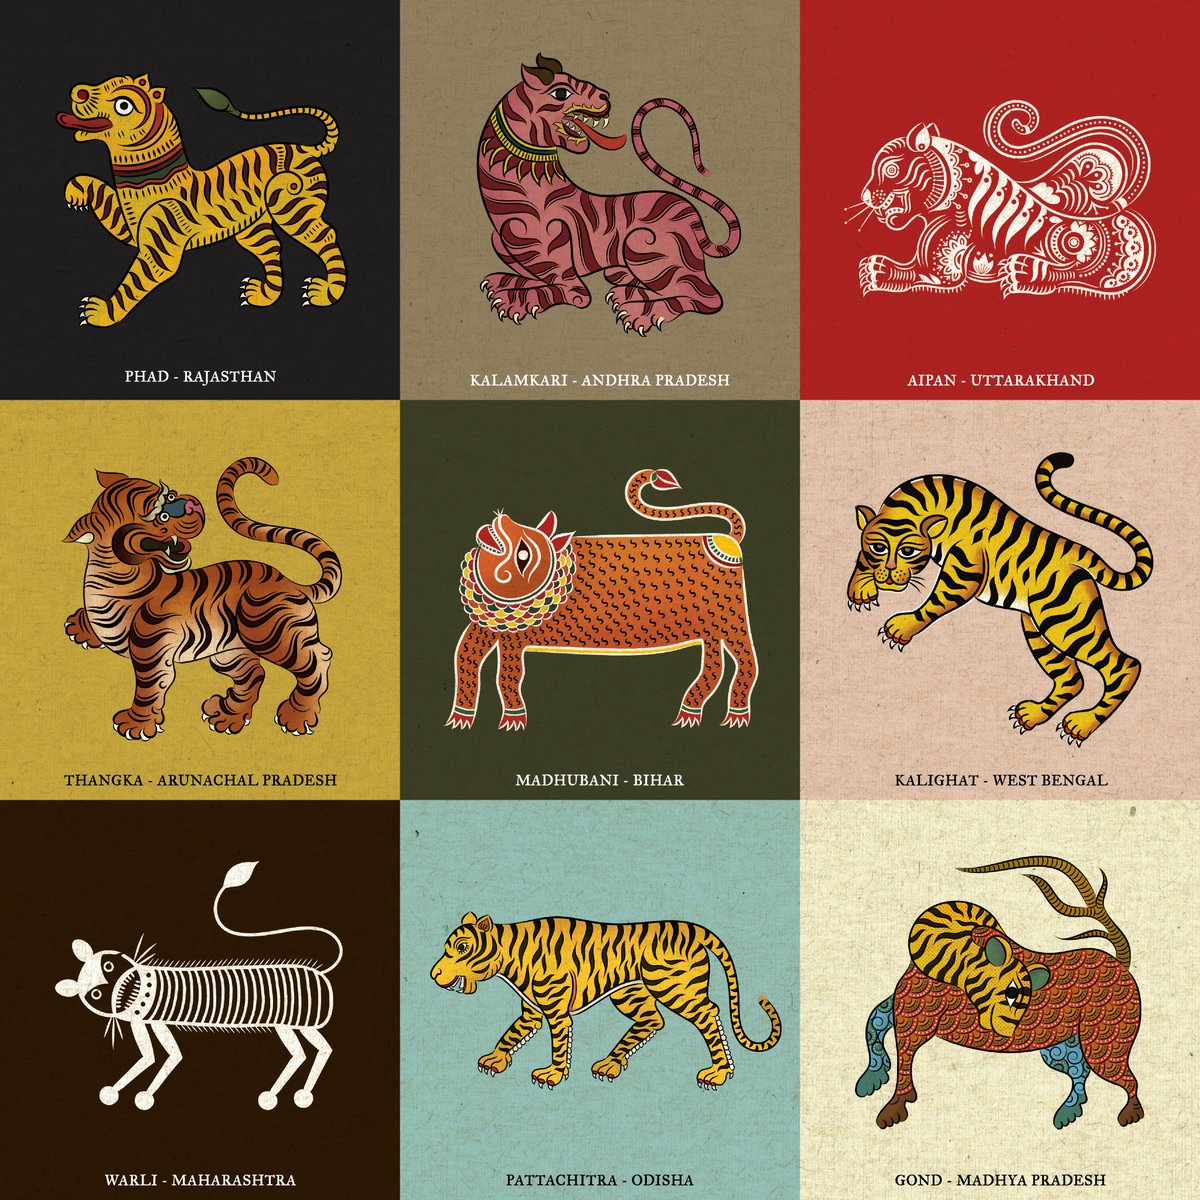 Here's presenting 9 Tigers, a sketch-note for some very intuitive yet mathematical observations. Which one of these looks like the tiger you have met?

#9tigers #folkart #india #wildlife #art #folk #madhubani #warli #culture #sudarshanshaw #jungle #forest #adobe #photoshop #phad